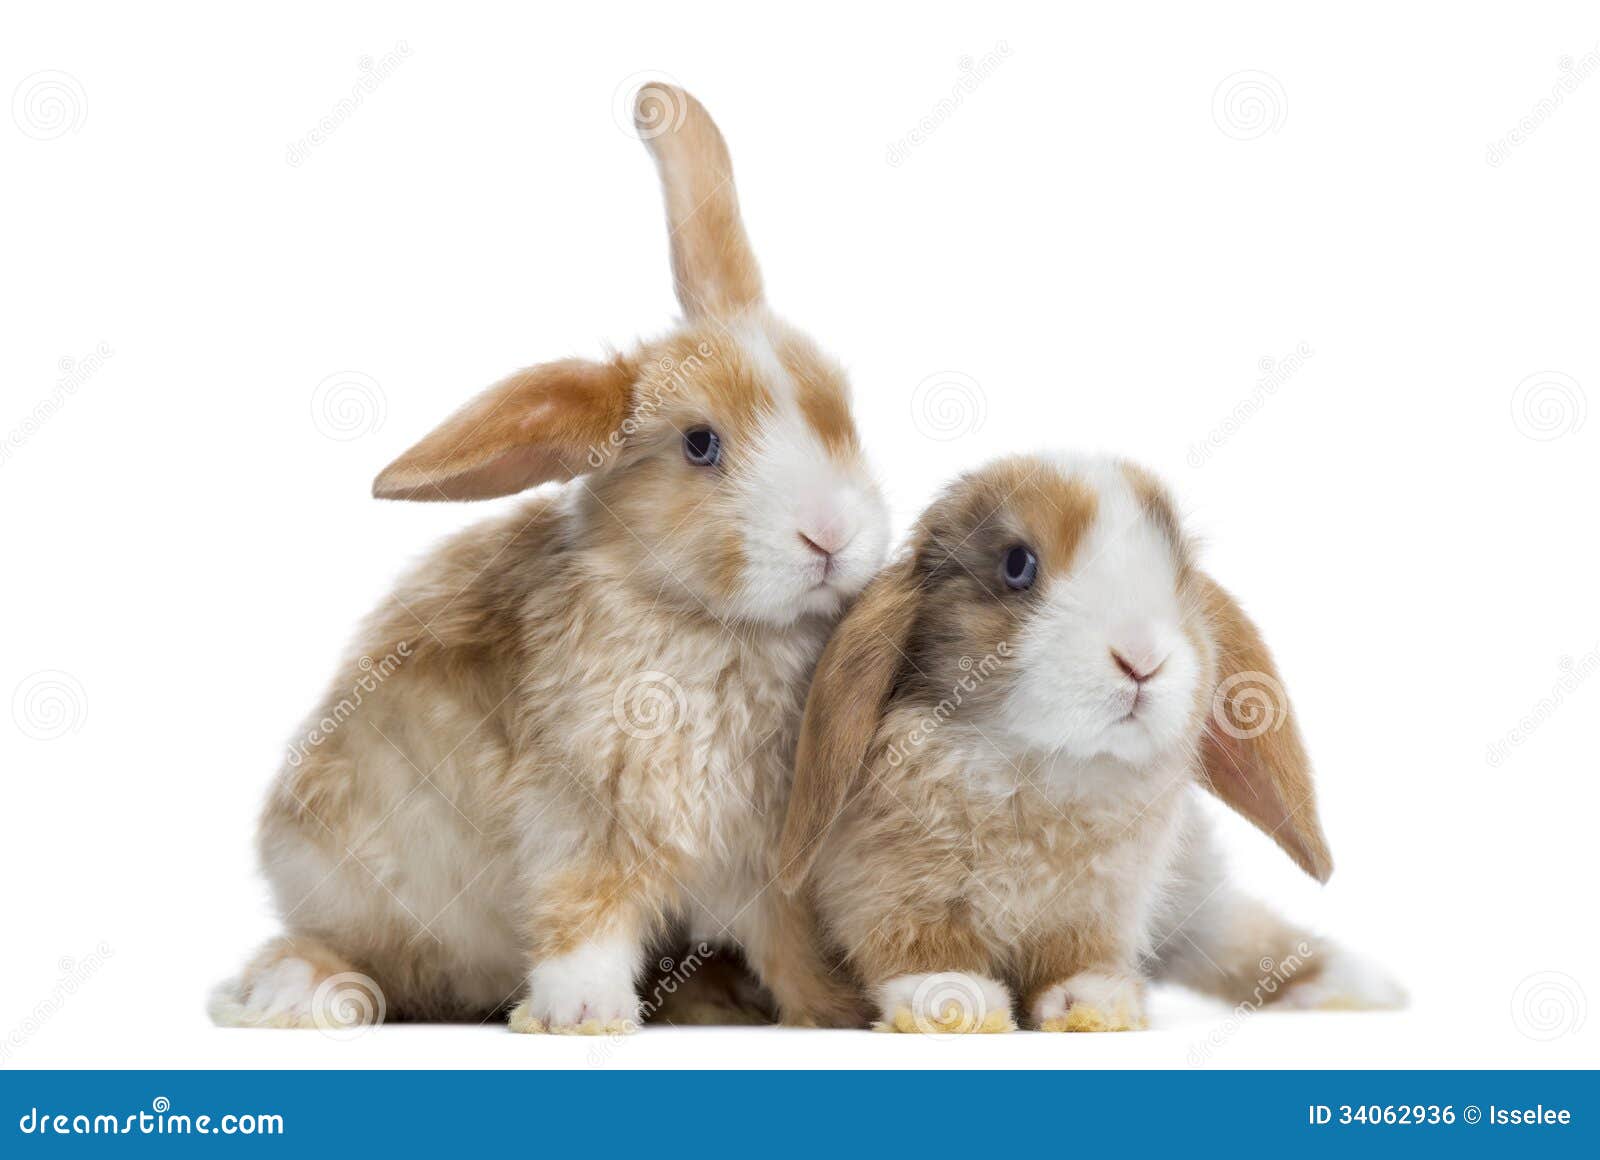 two satin mini lop rabbits next to each other, 